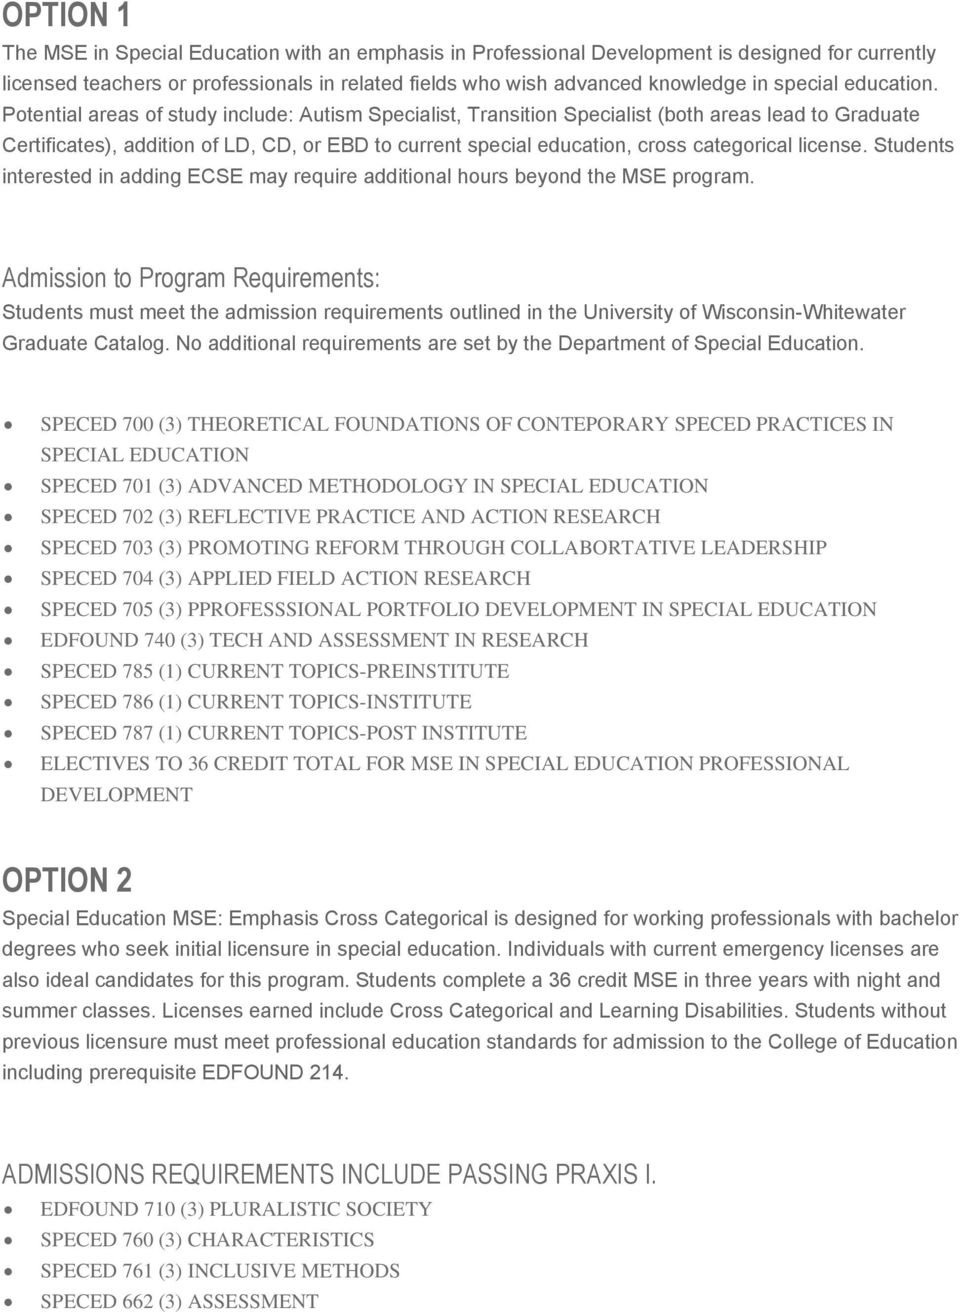 Potential areas of study include: Autism Specialist, Transition Specialist (both areas lead to Graduate Certificates), addition of LD, CD, or EBD to current special education, cross categorical